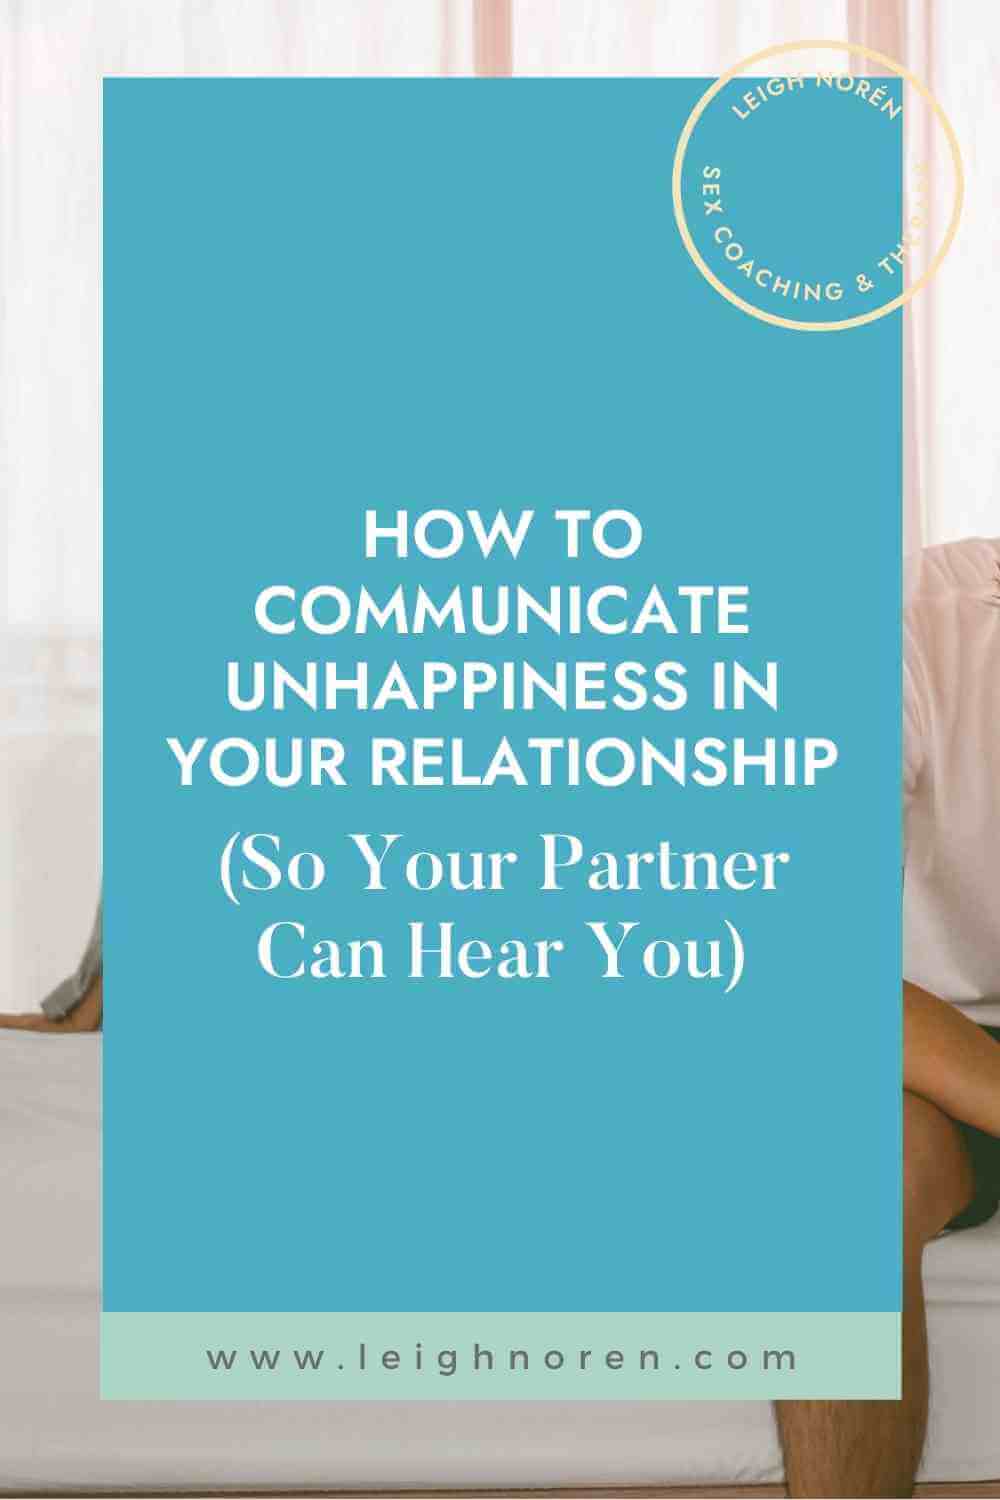 How to communicate unhappiness in a relationship so your partner can hear you